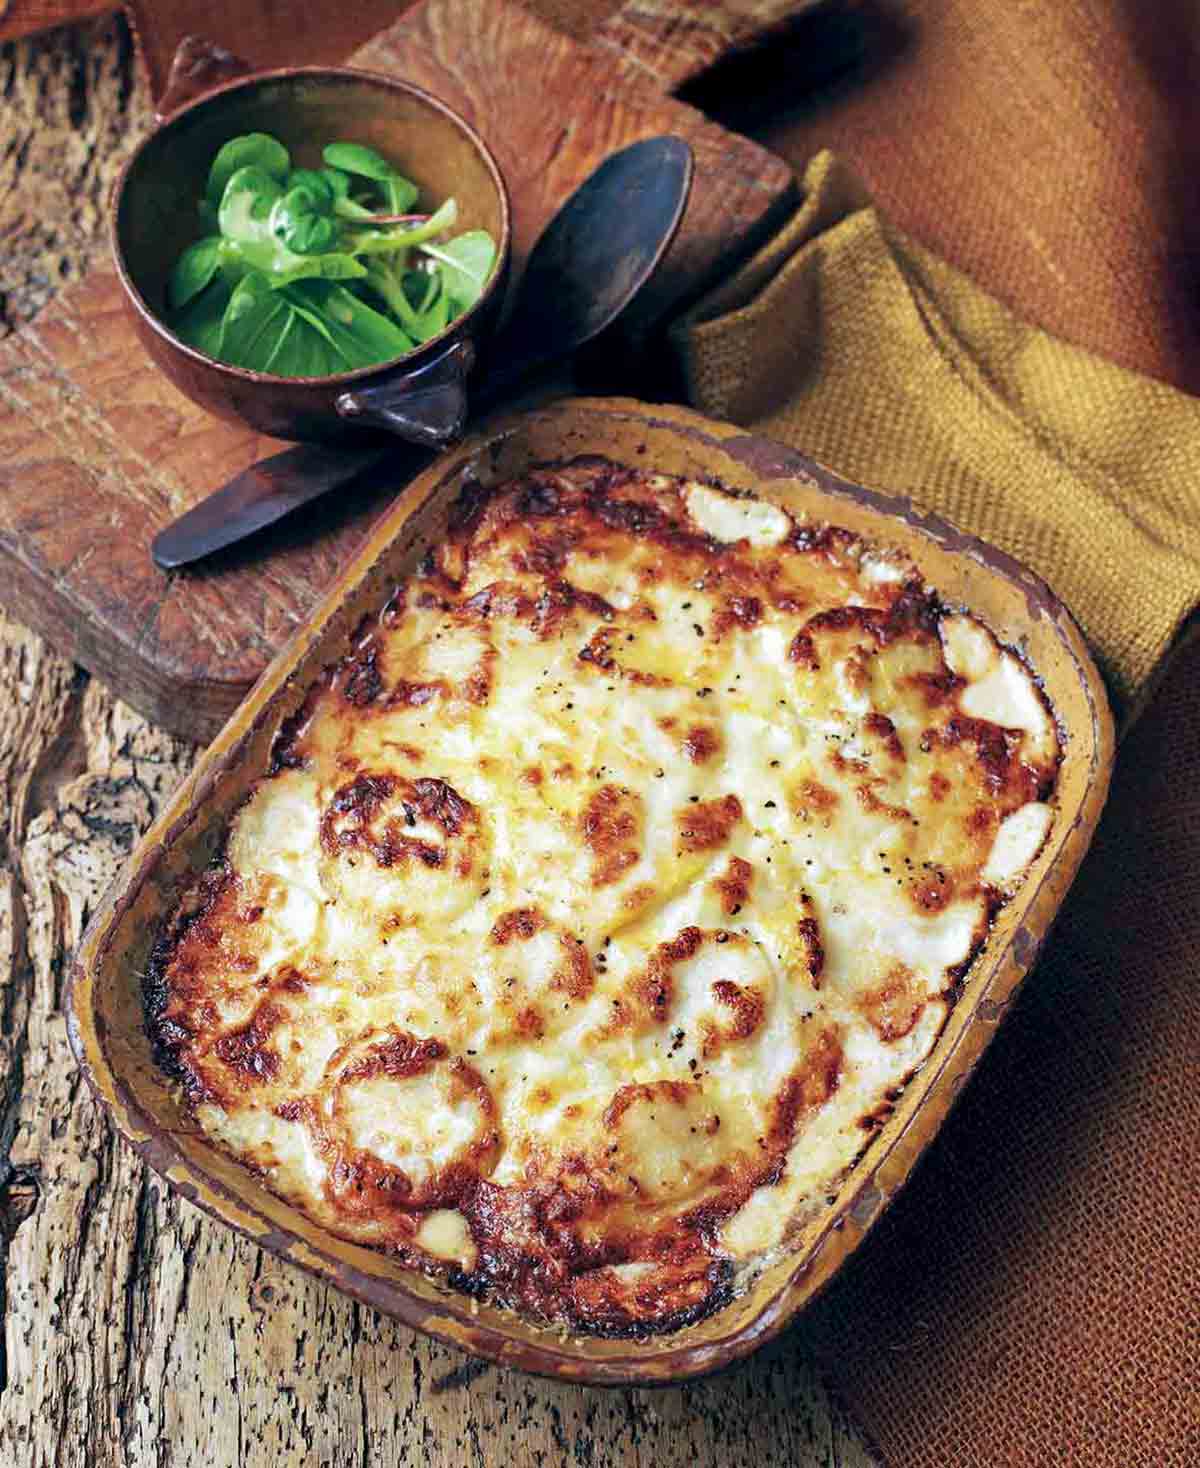 Casserole dish of root vegetable gratin topped with bubbly brown cheese on wood table